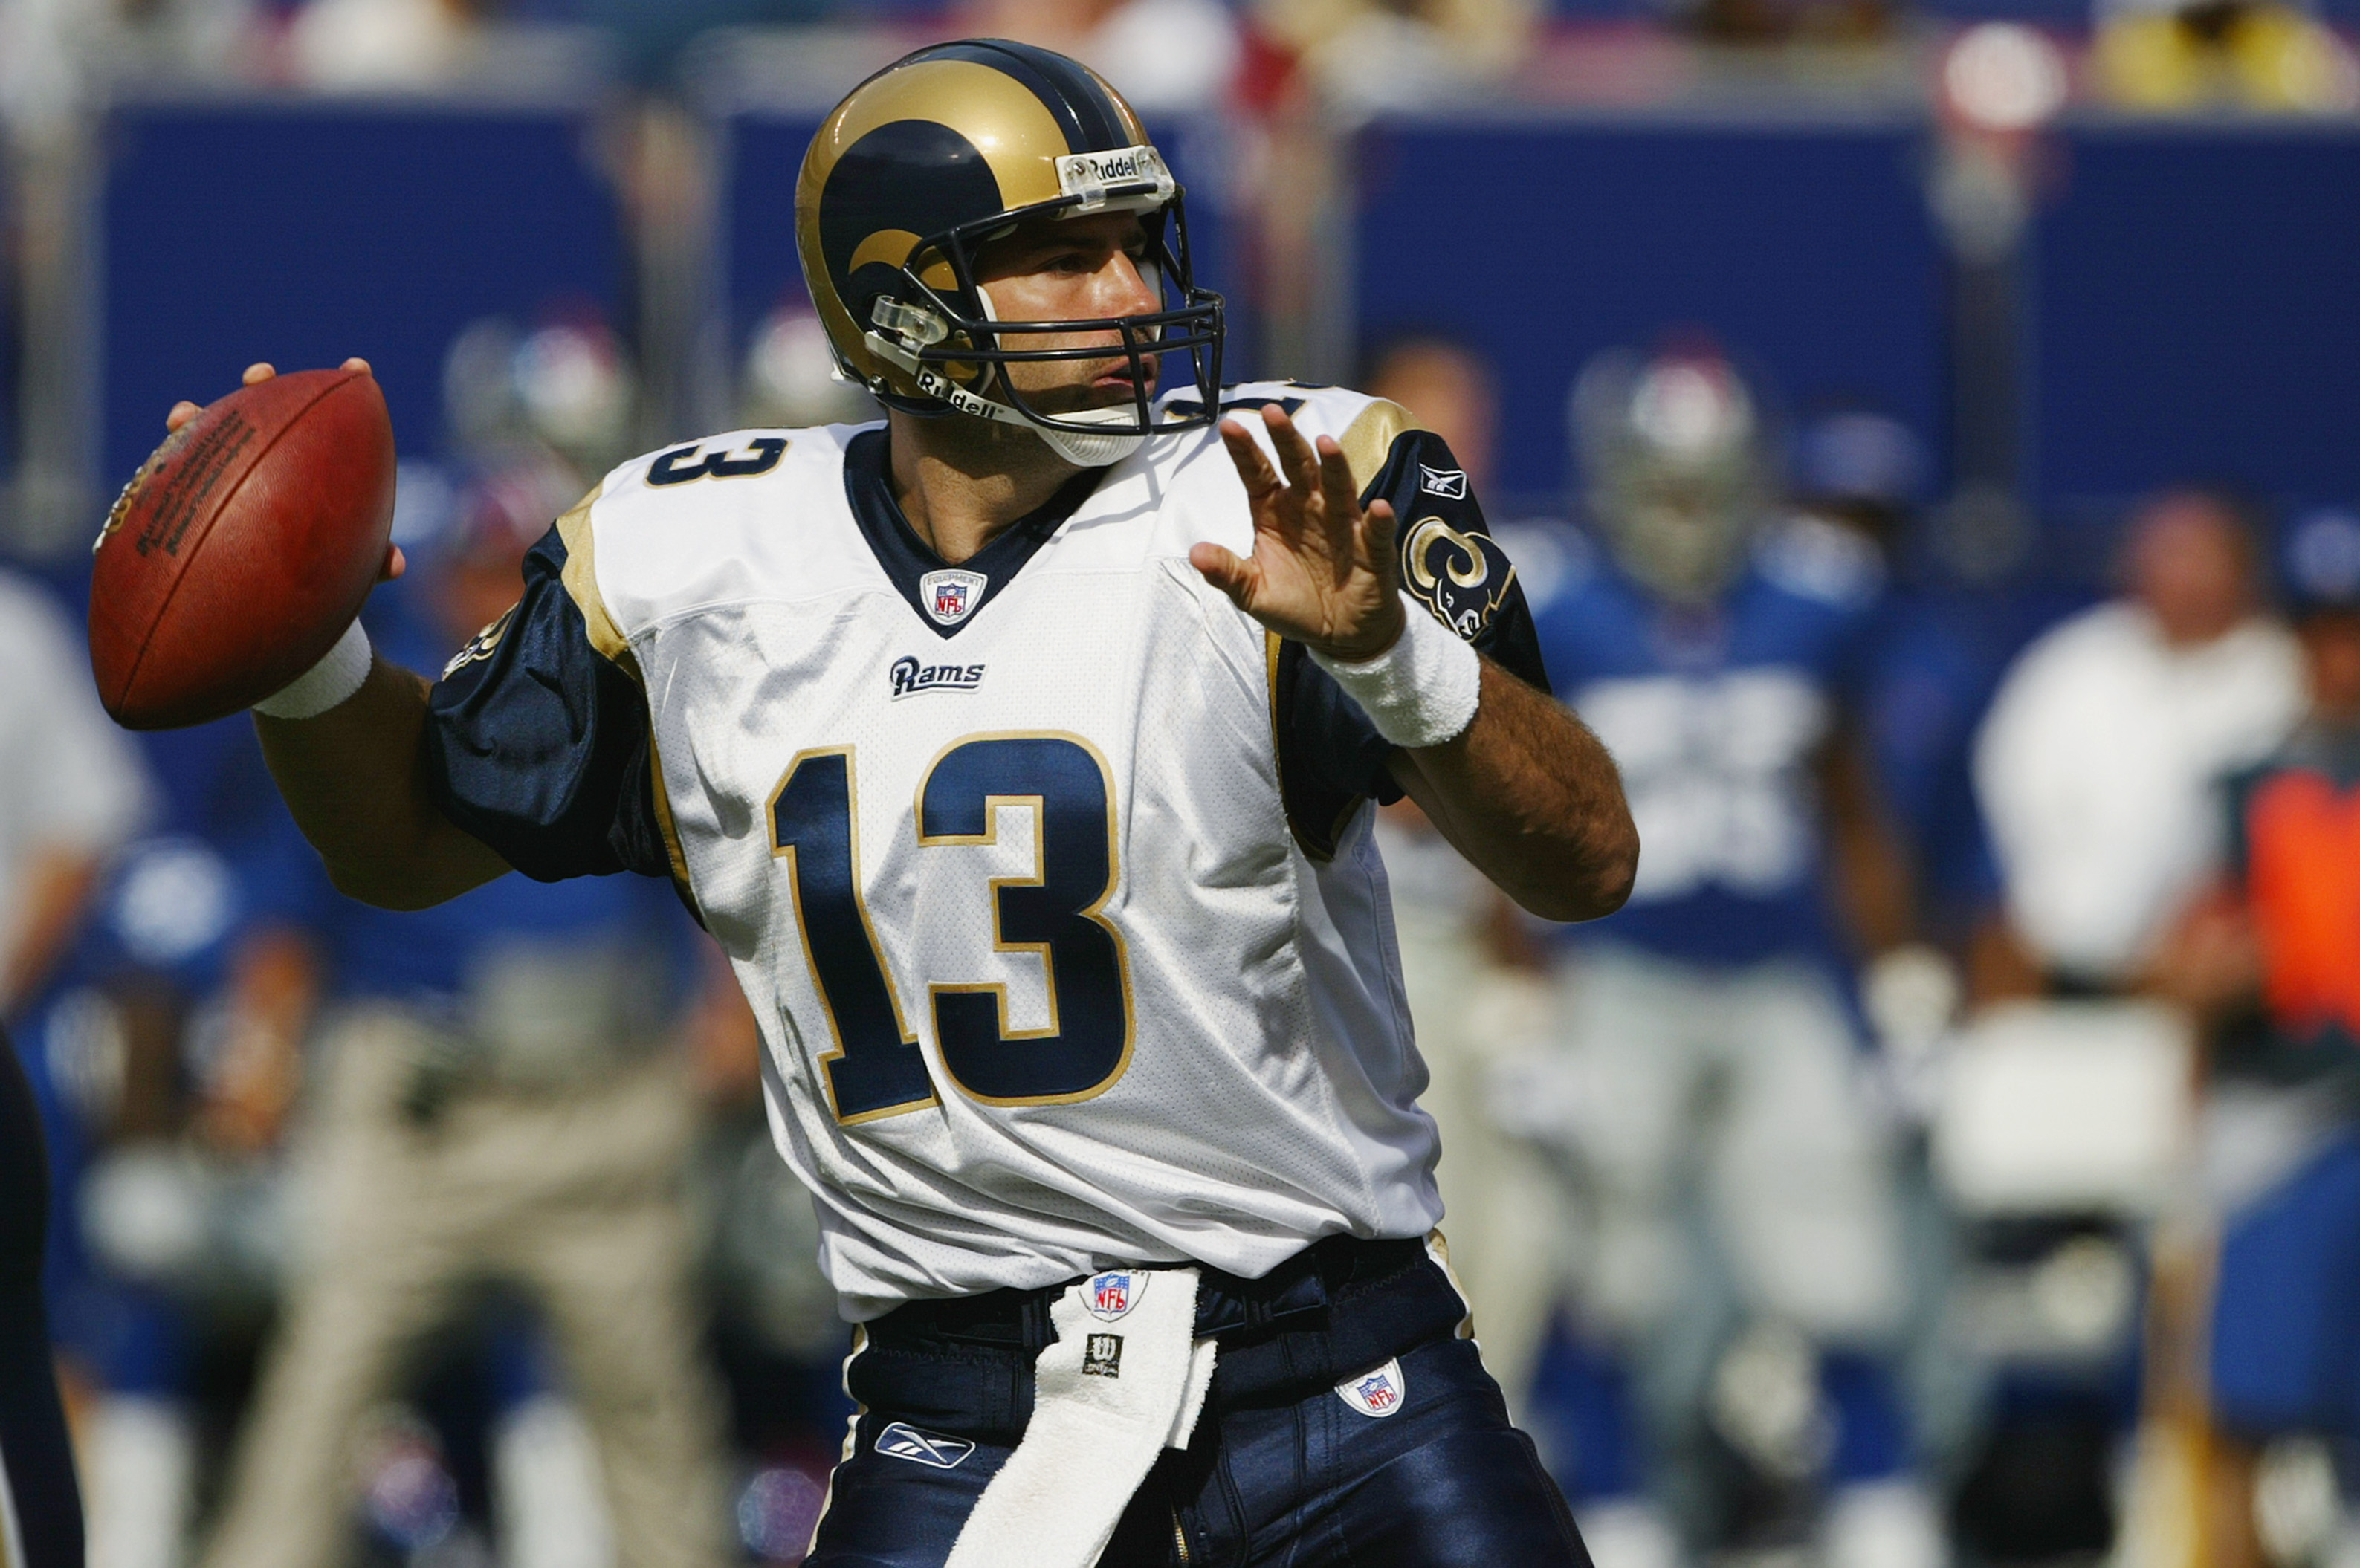 Nfl Best Of The 2000s Top 20 Quarterbacks News Scores Highlights Stats And Rumors 